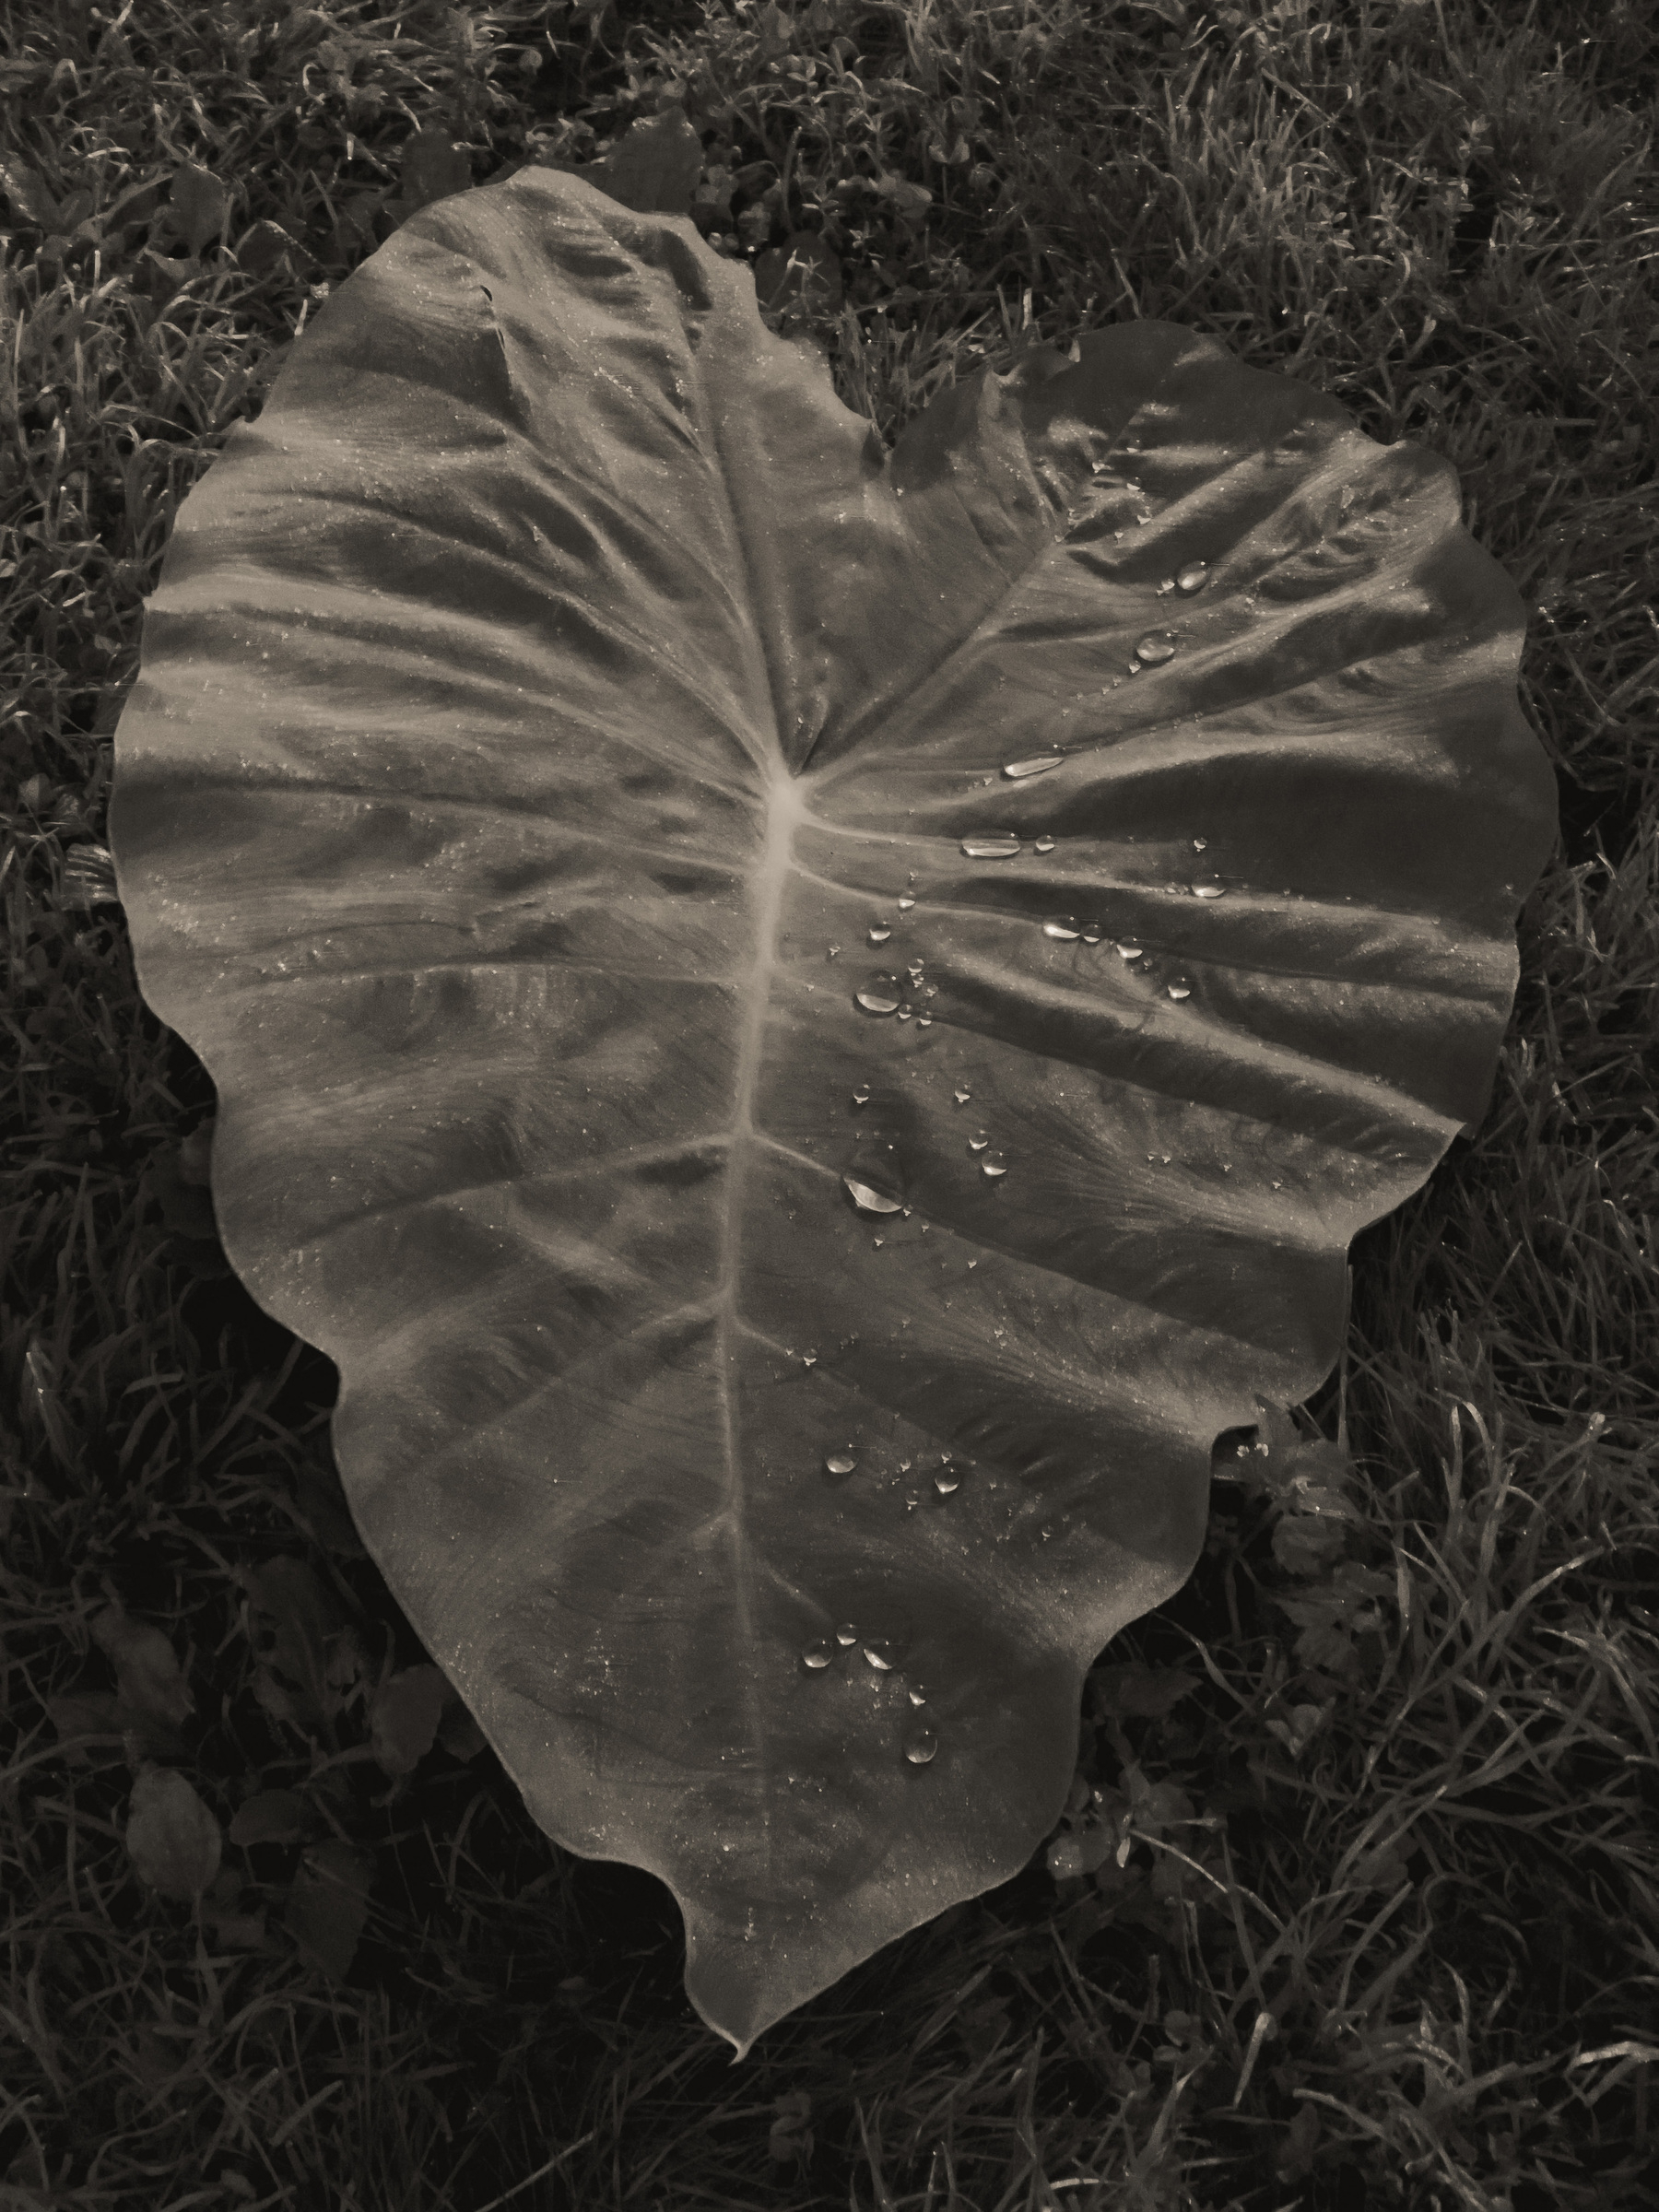 Large heart shaped leaf laying on the ground with water droplets reflecting street light.